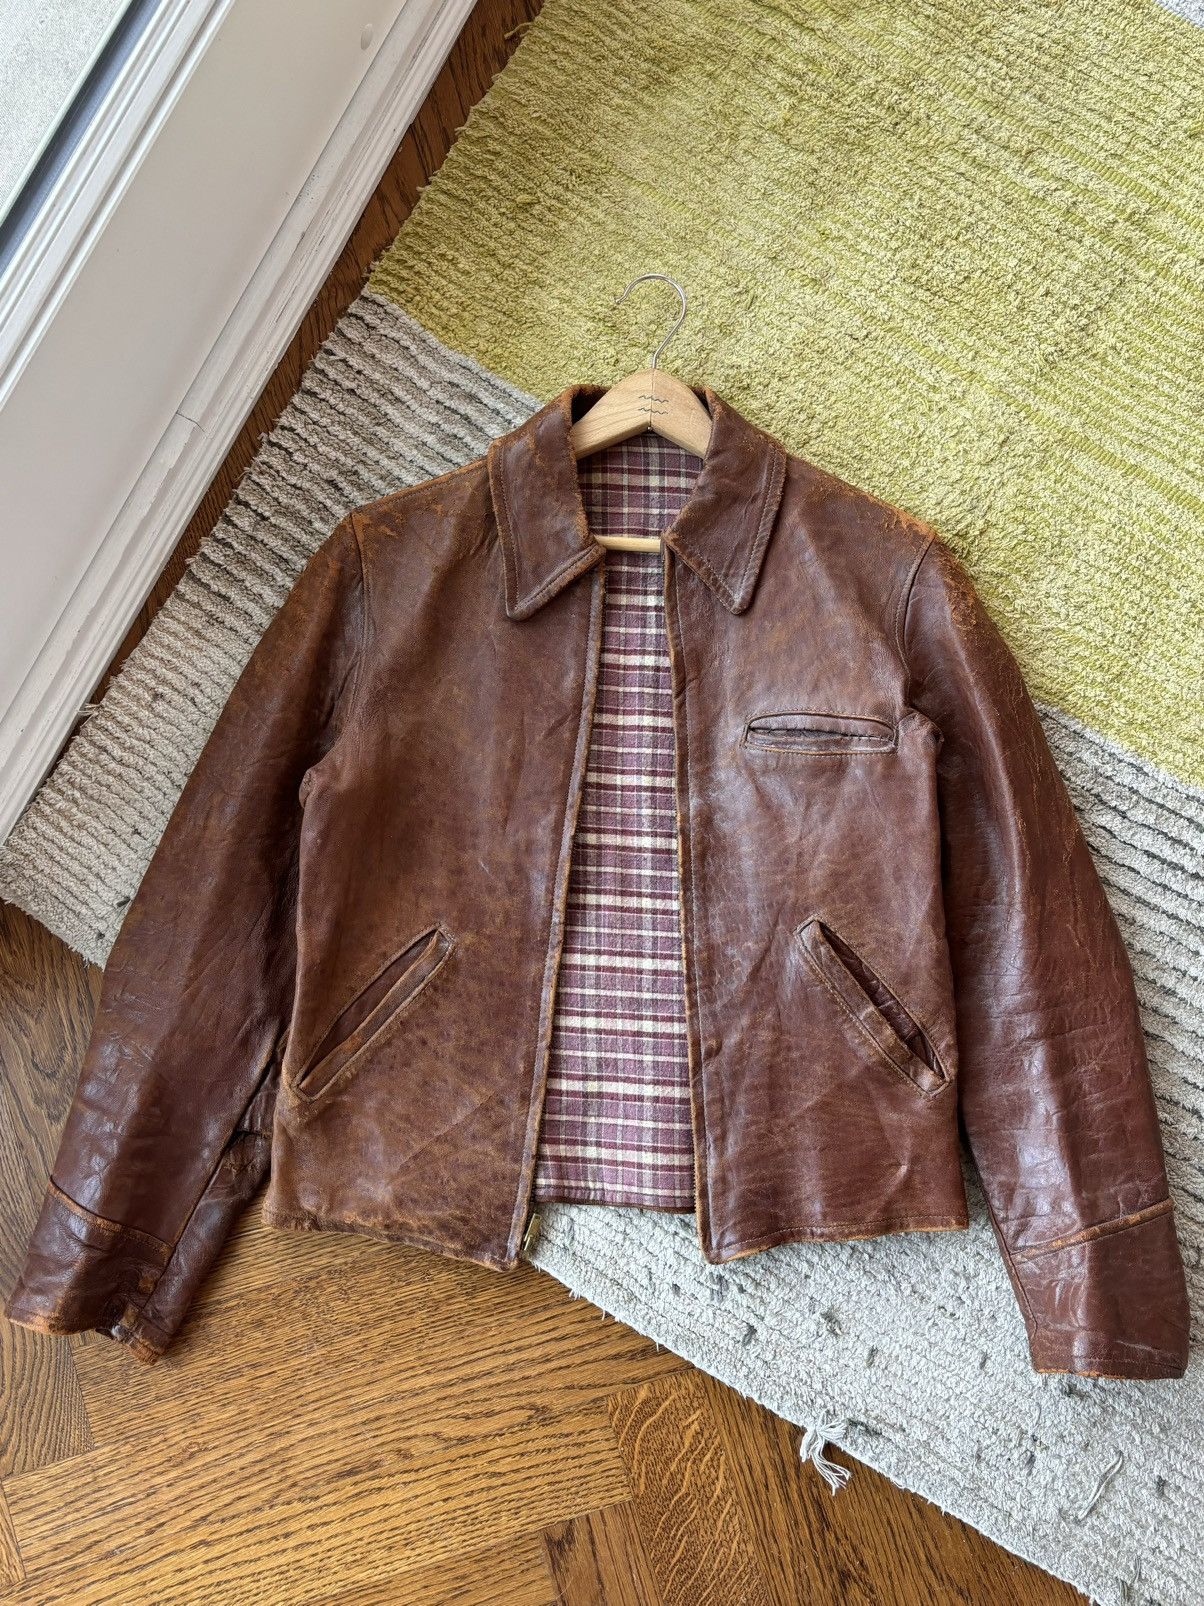 Pre-owned Leather Jacket X Schott 1940s Leather Jacket True Vintage Trucker Distressed Type 2 In Brown